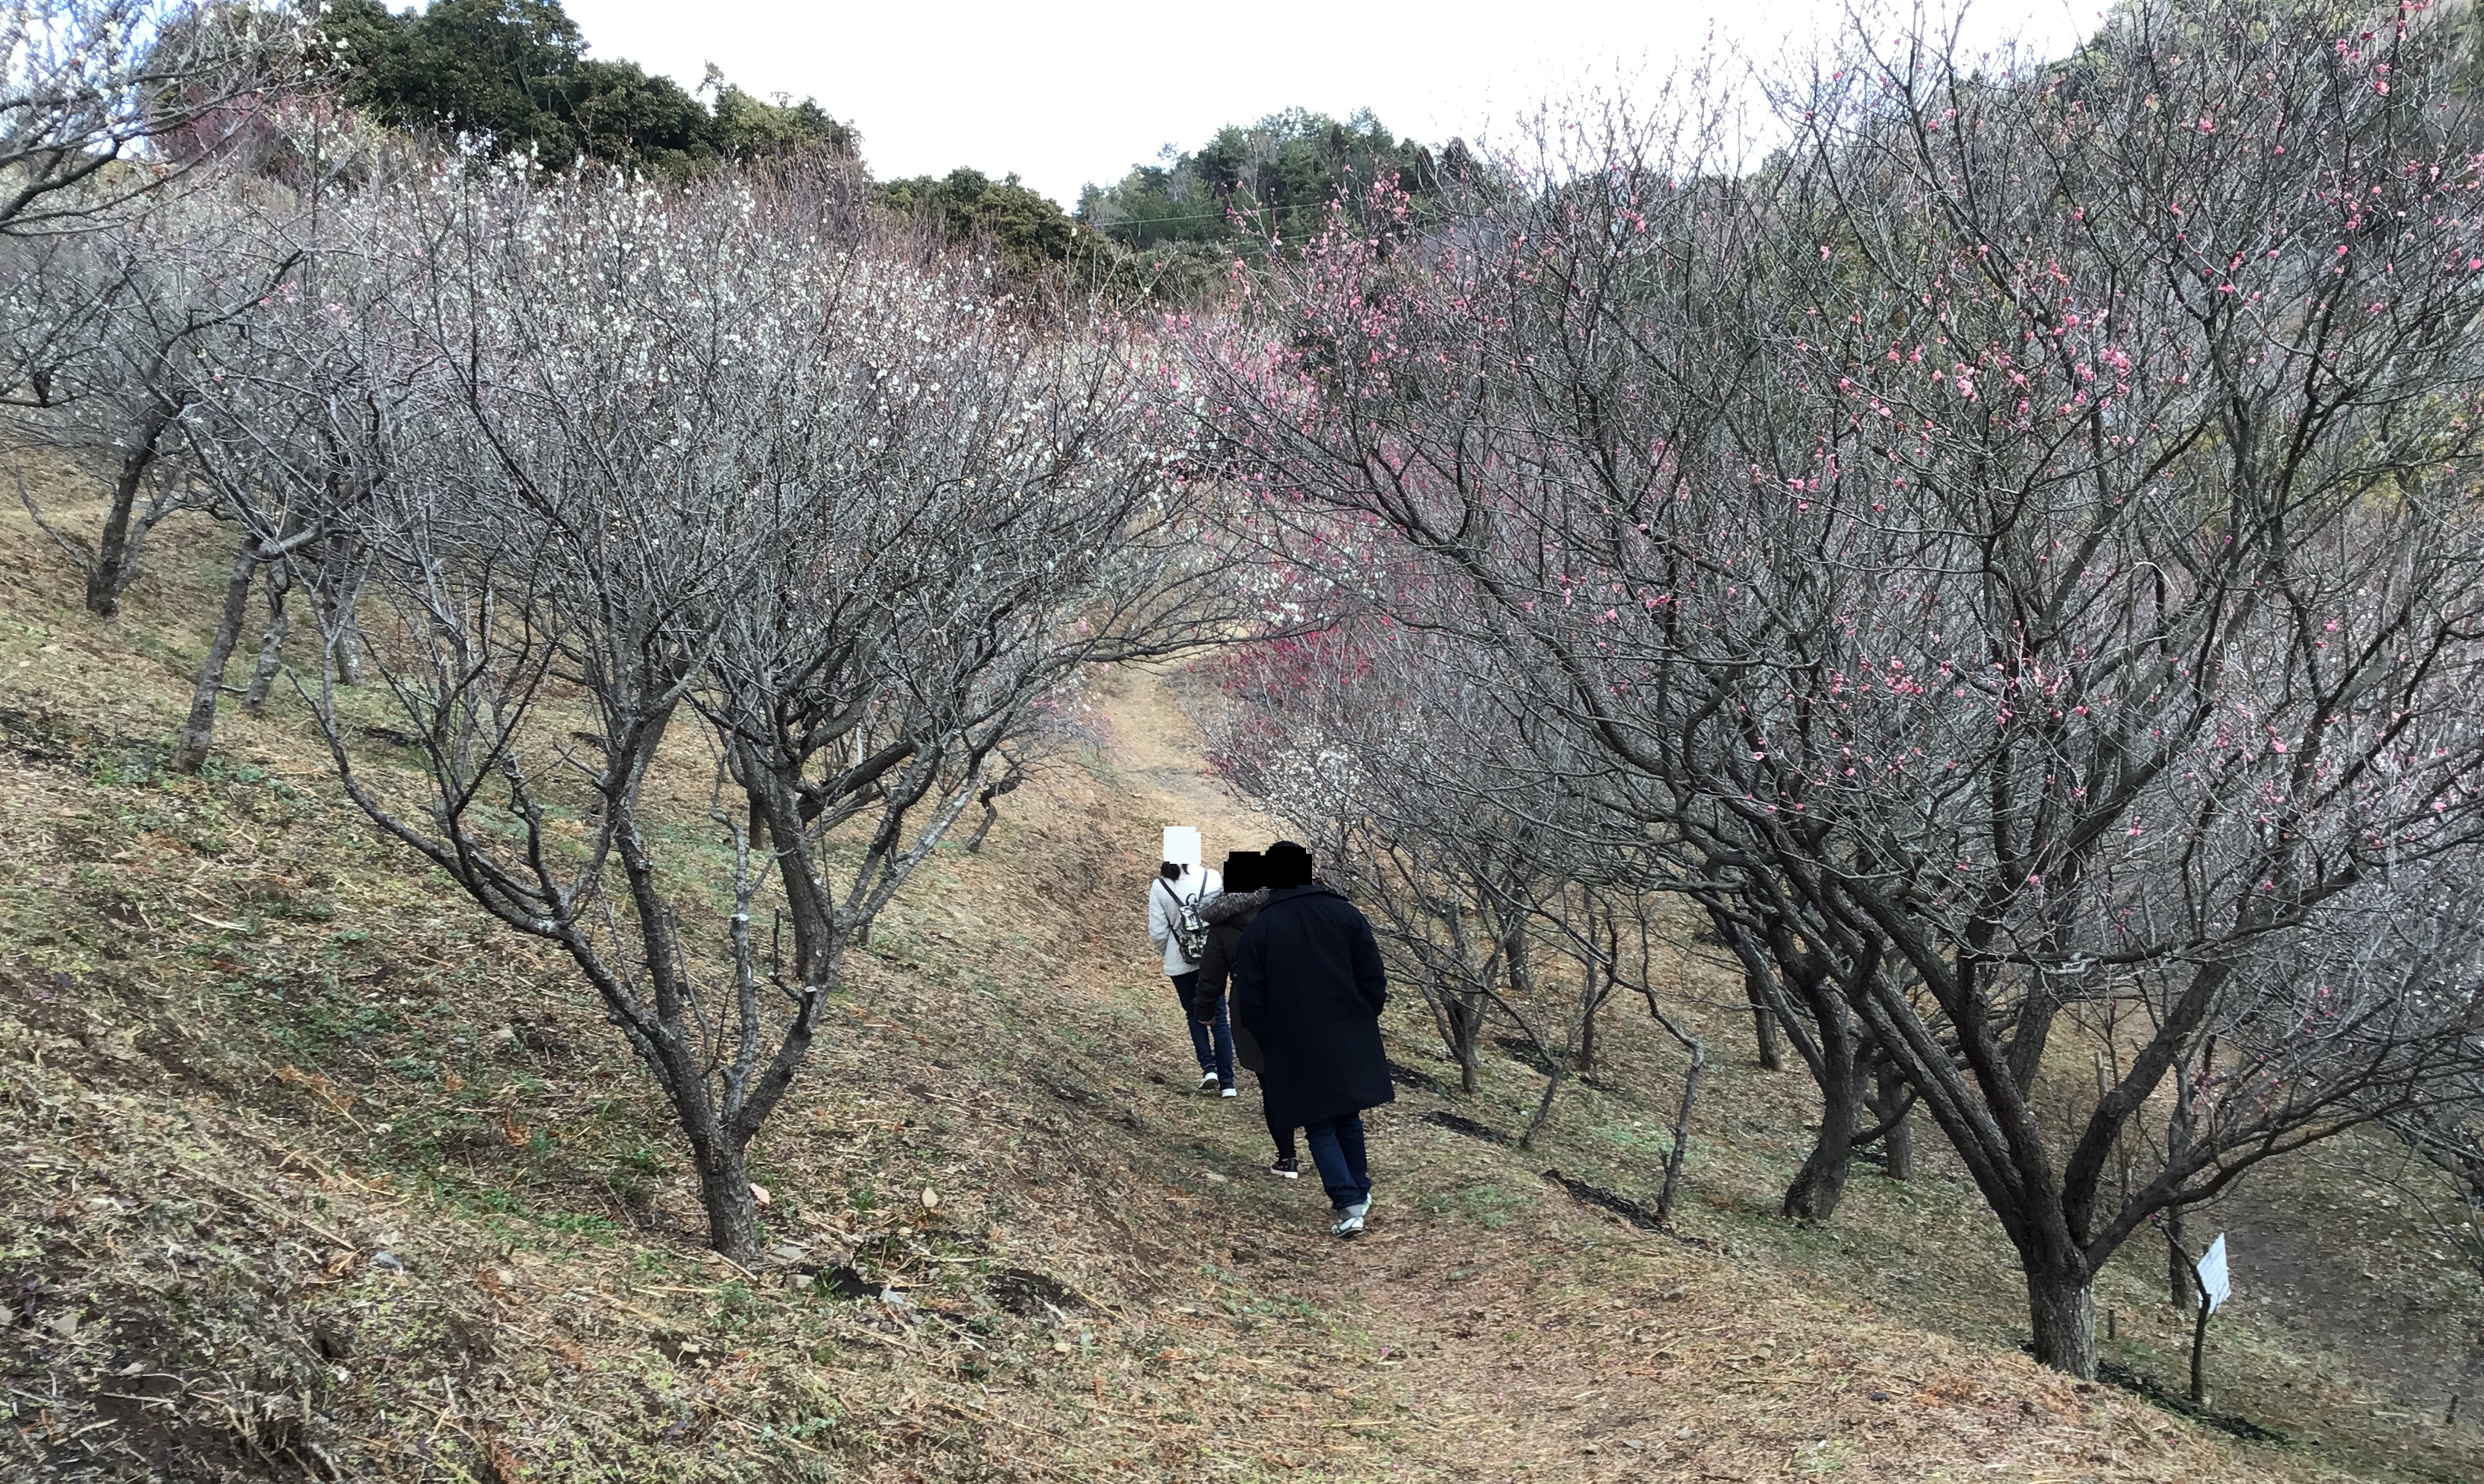 A plum blossom orchard without any flowers on the trees